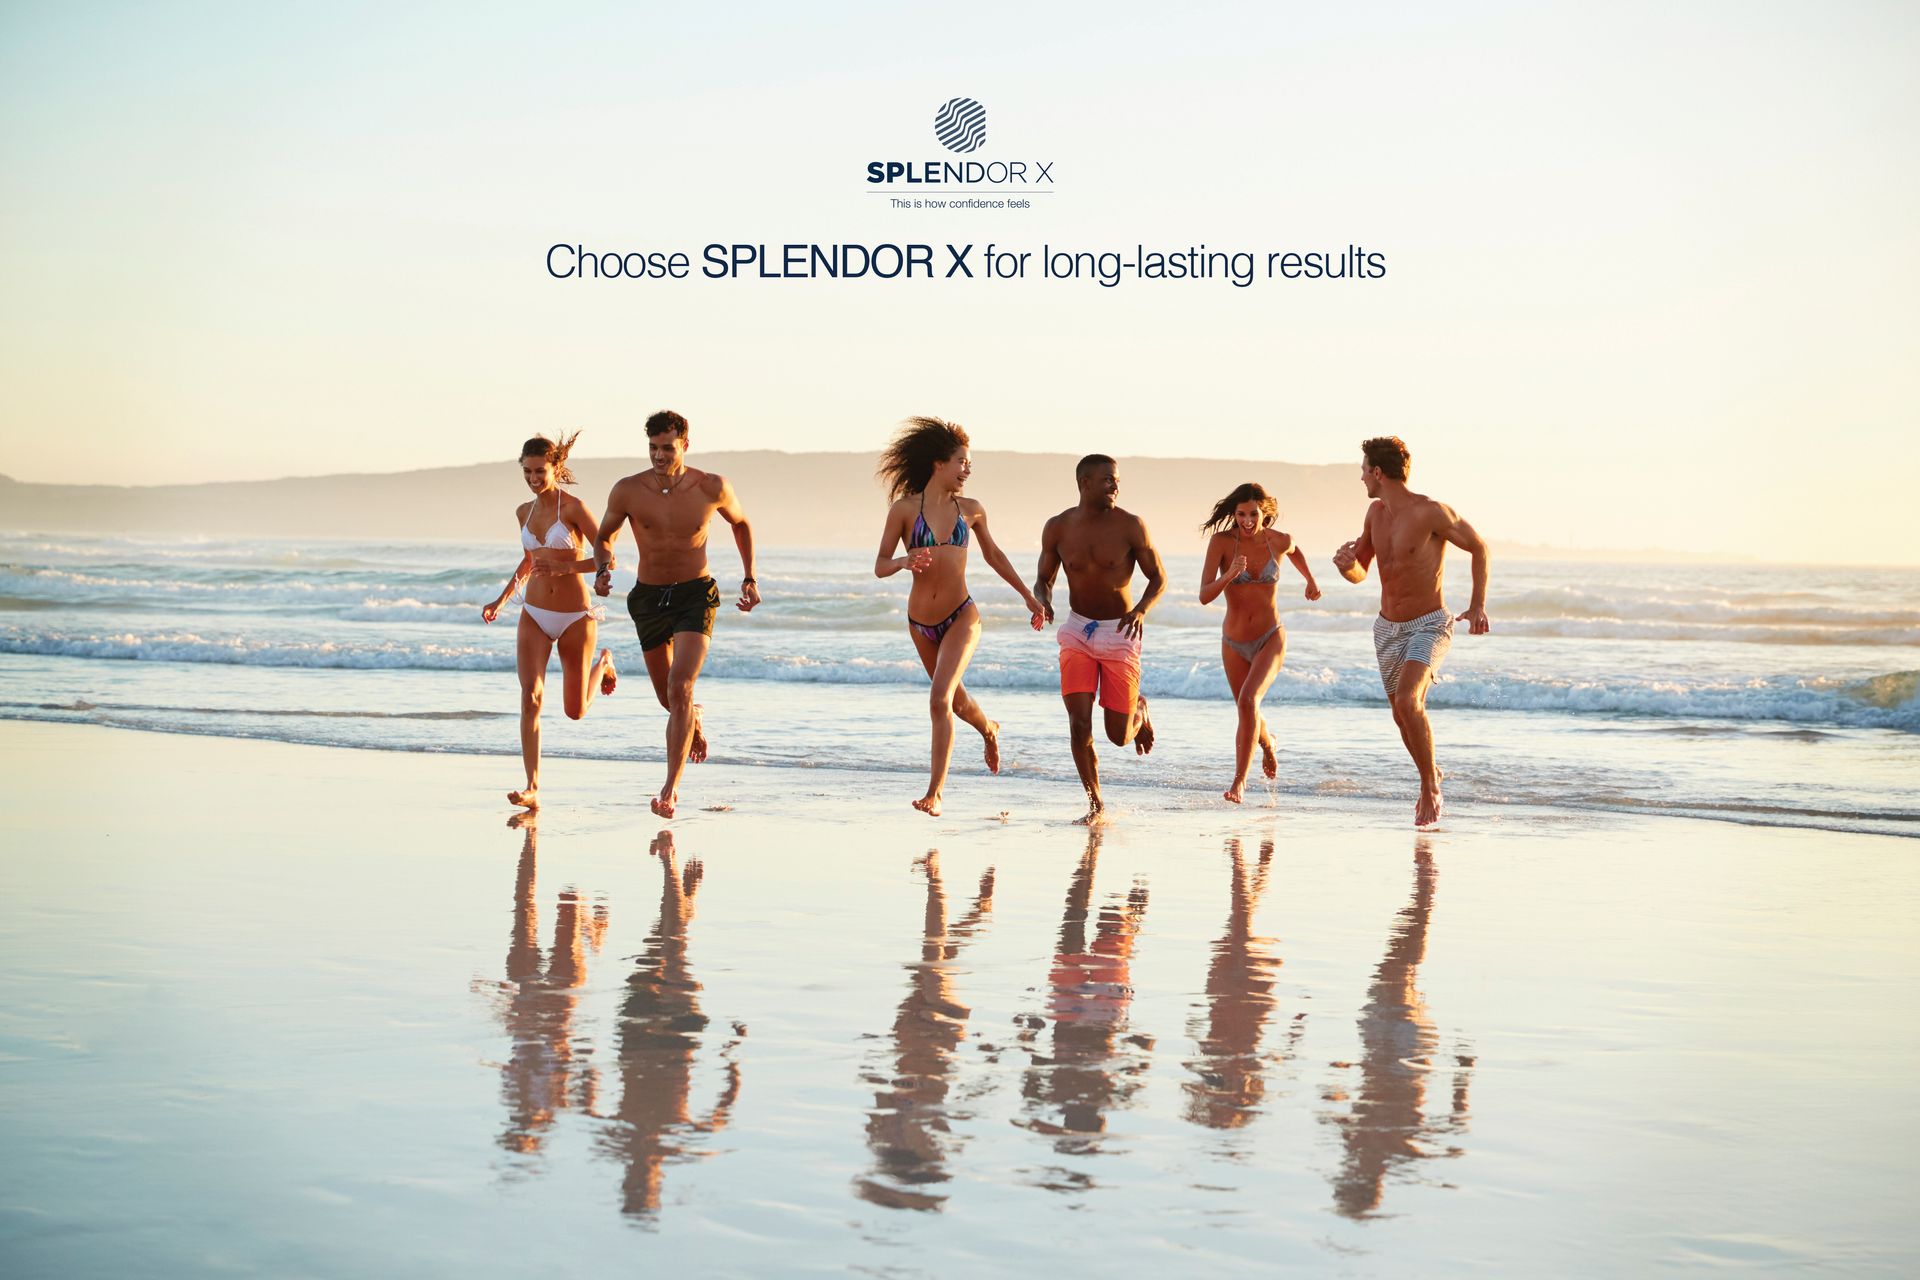 Splendor X promotional image, 6 fit looking people running on the beach in bathing suits